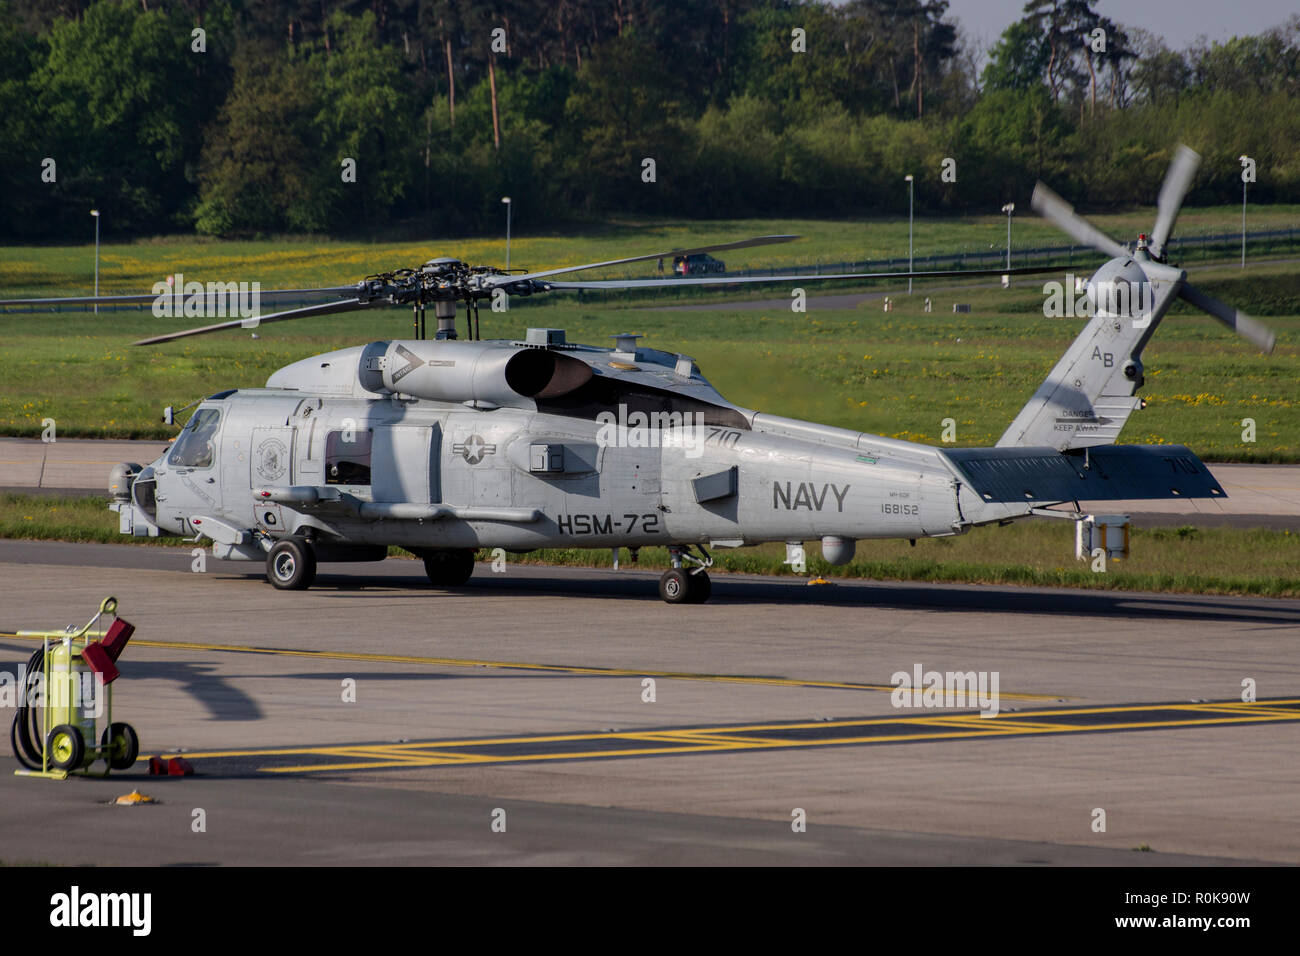 MH-60R ASW helicopter of the U.S. Navy from HSM-72. Stock Photo